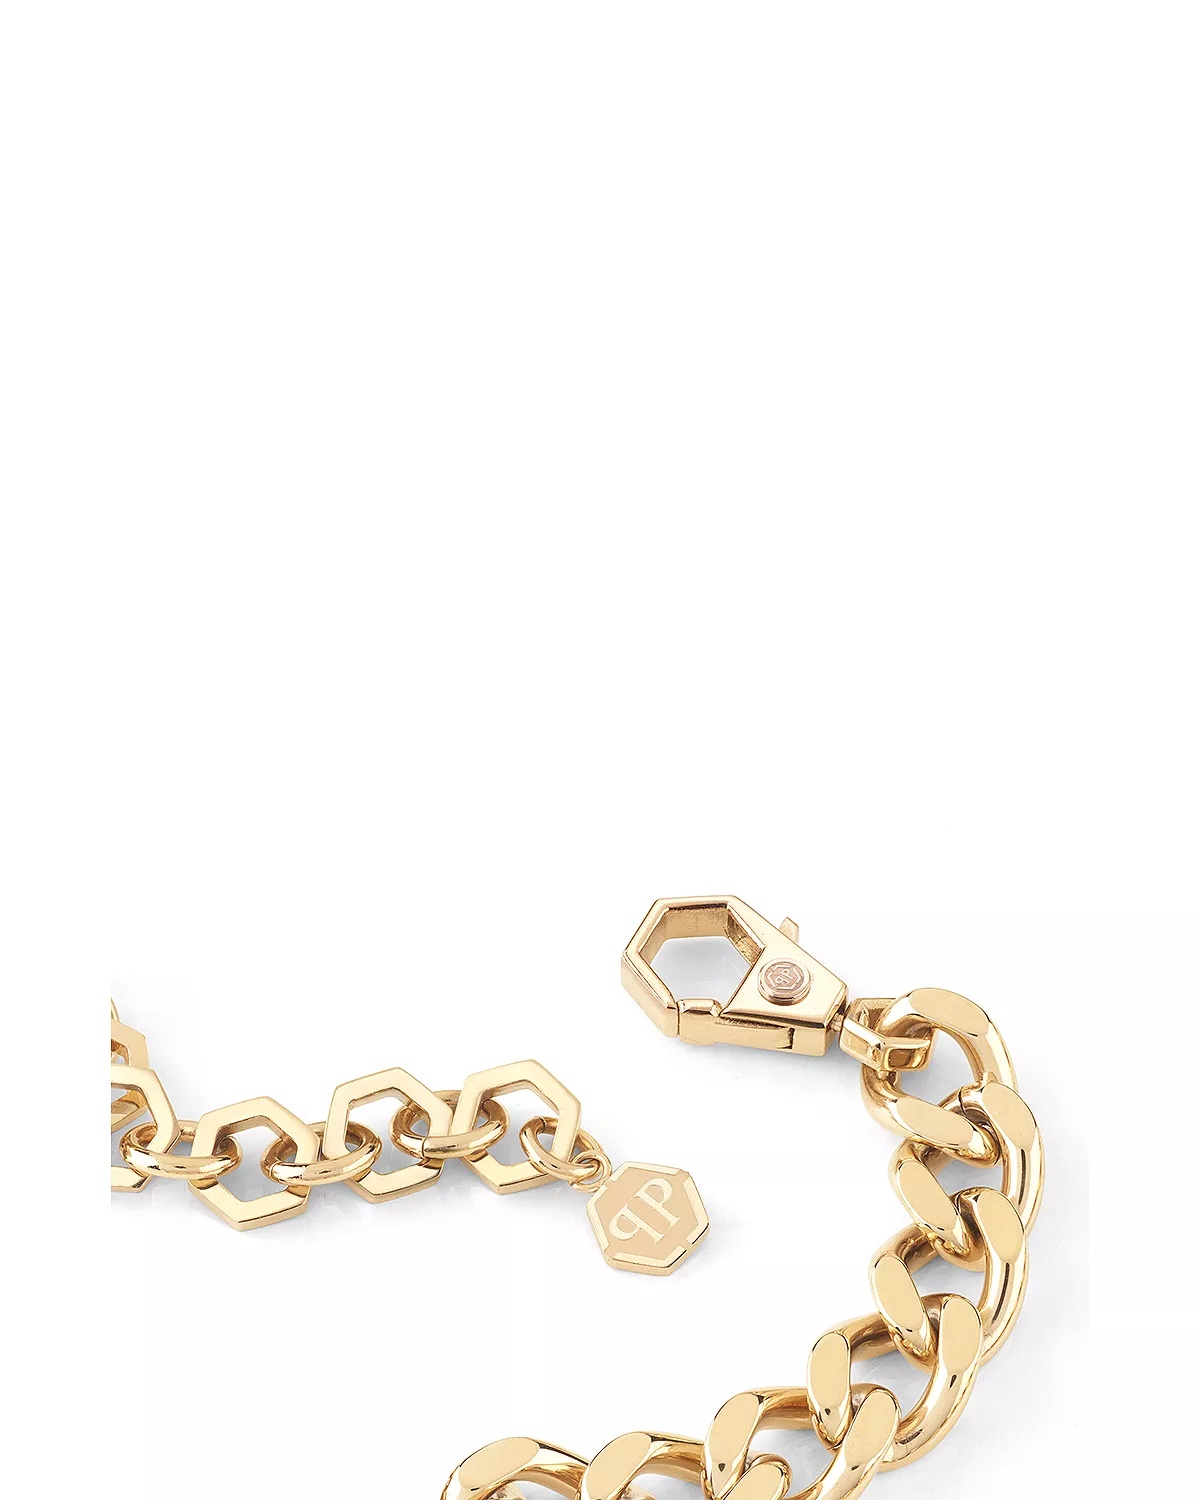 Lettering Gold Tone Chain Necklace, 15" - 4